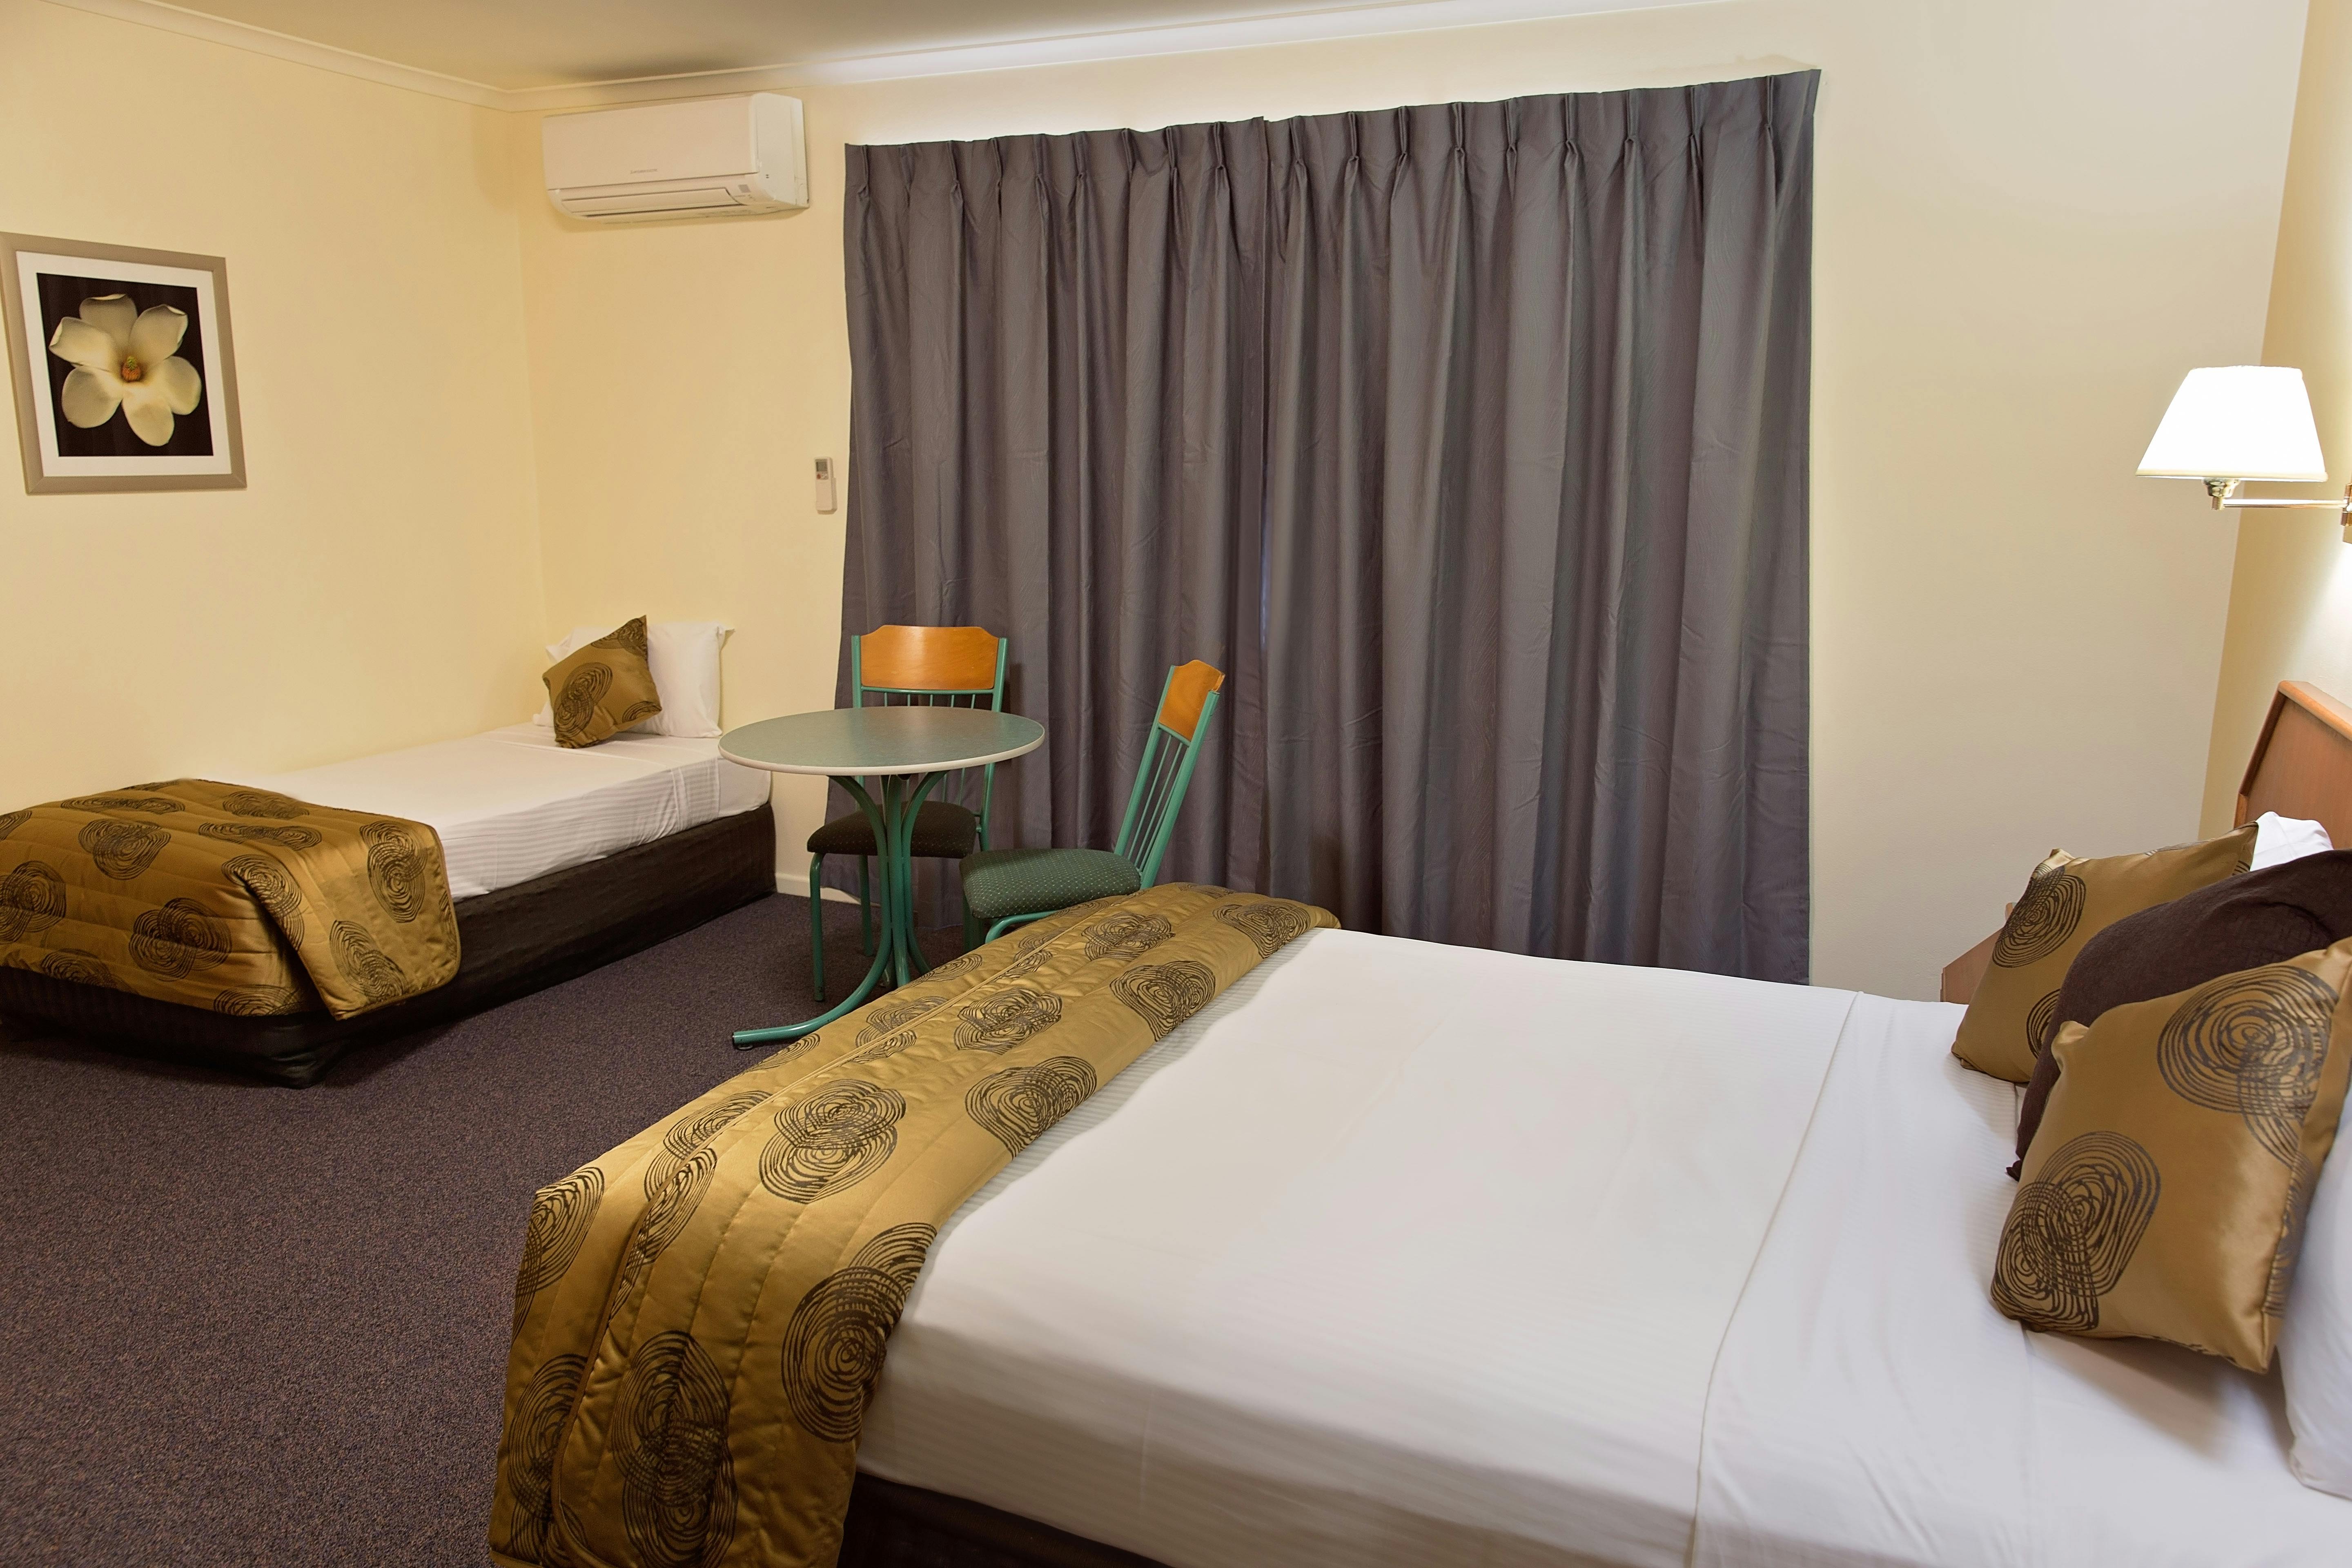 Superior Spa Room White Lace Motor Inn Mackay, Experience comforts of your own home